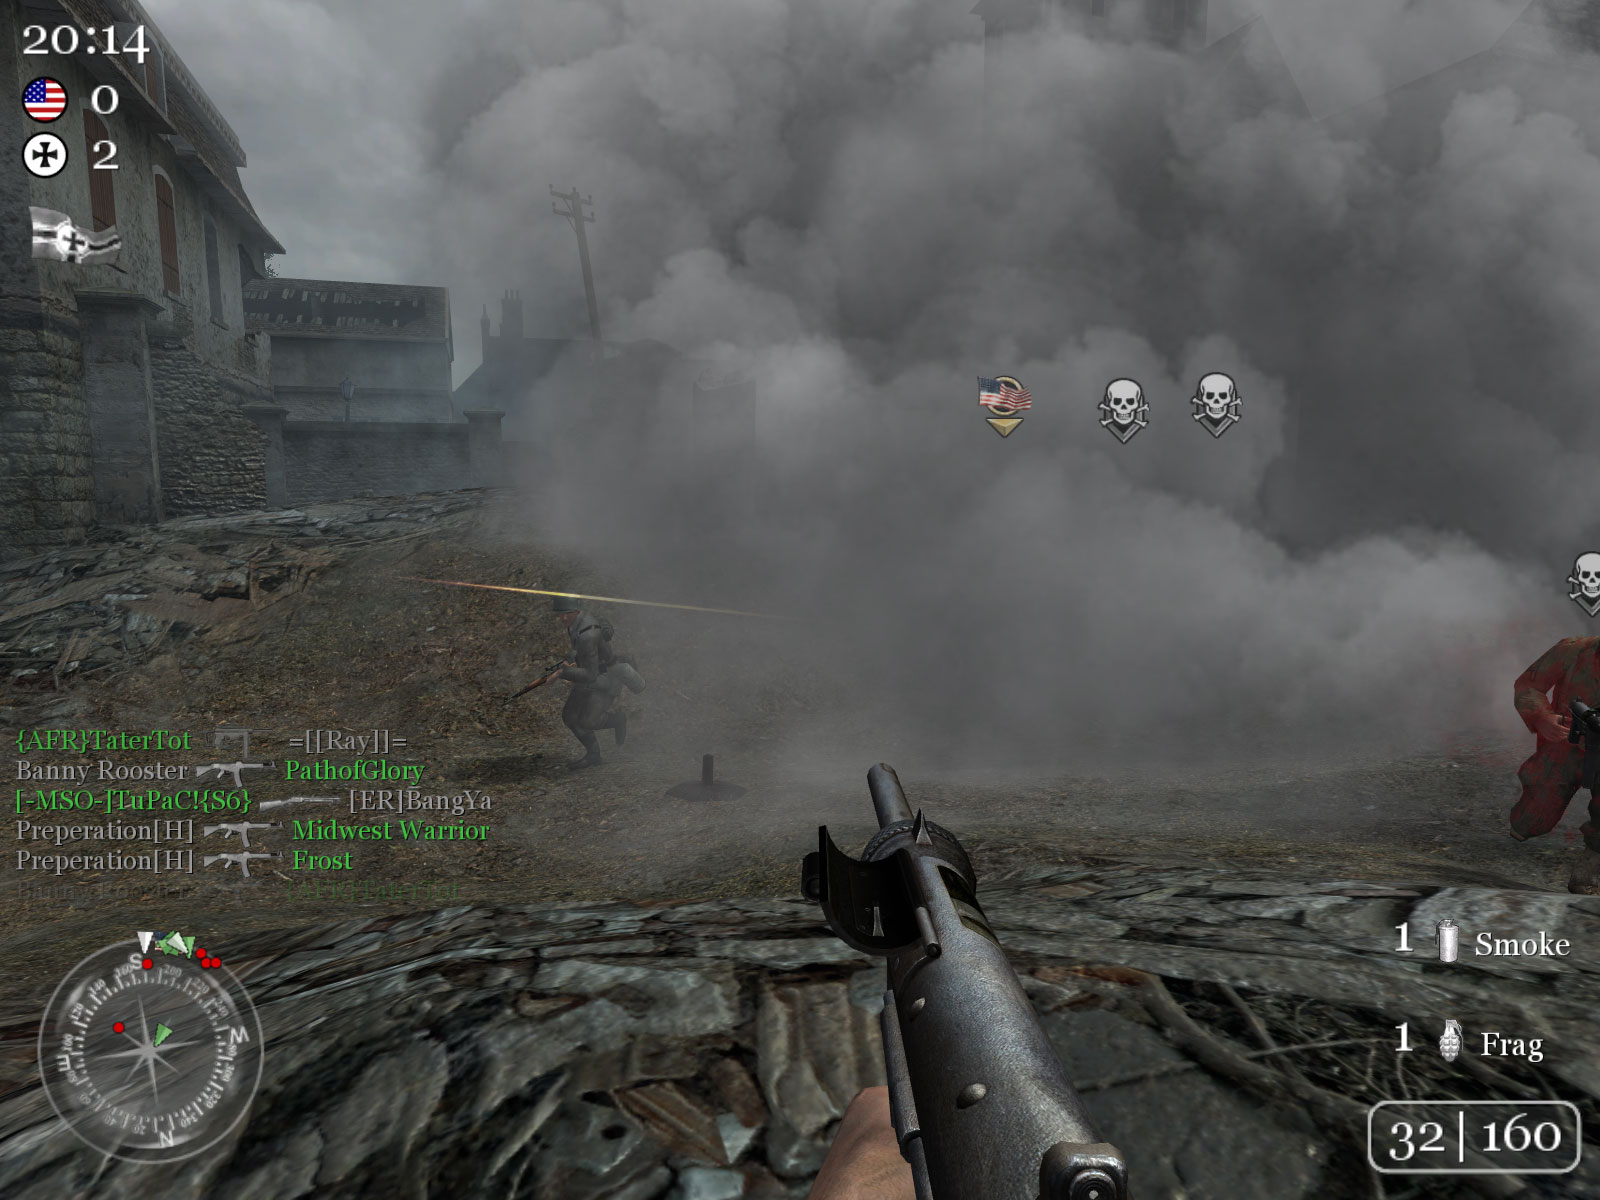 Call Of Duty 4 Mw Patch 1.3